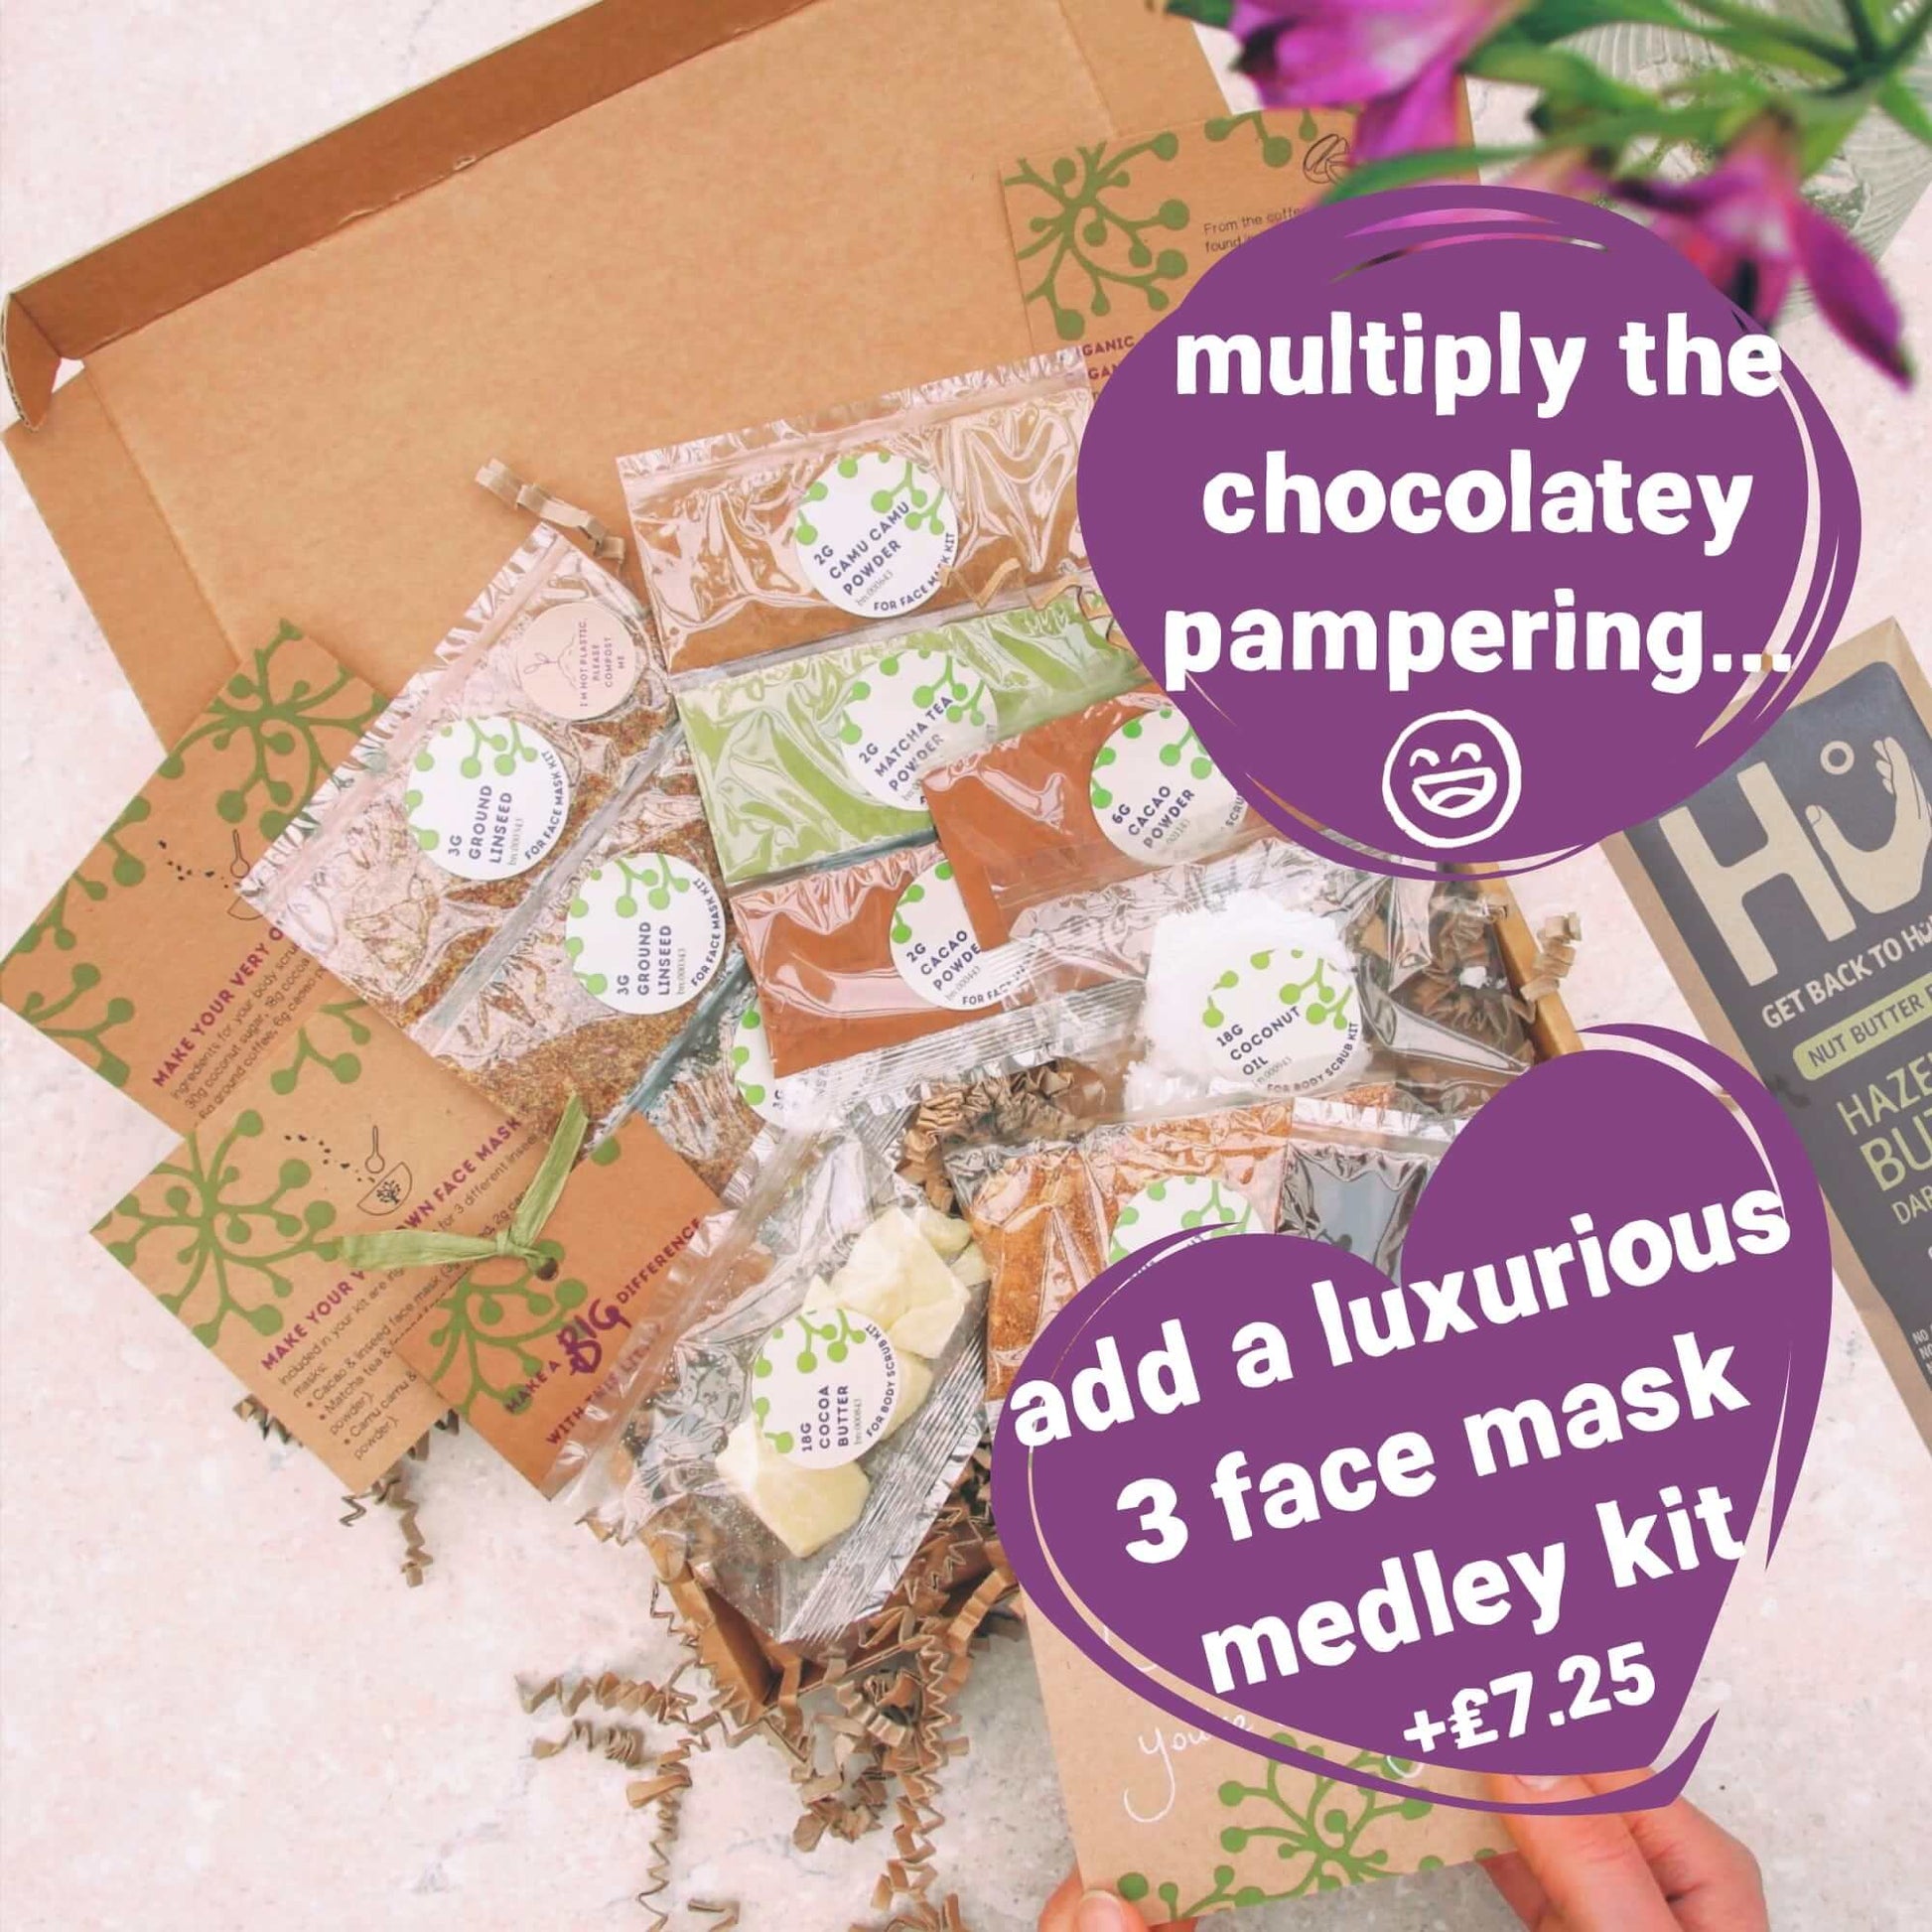 add 3 eco-friendly face mask kits to mother's day gift box